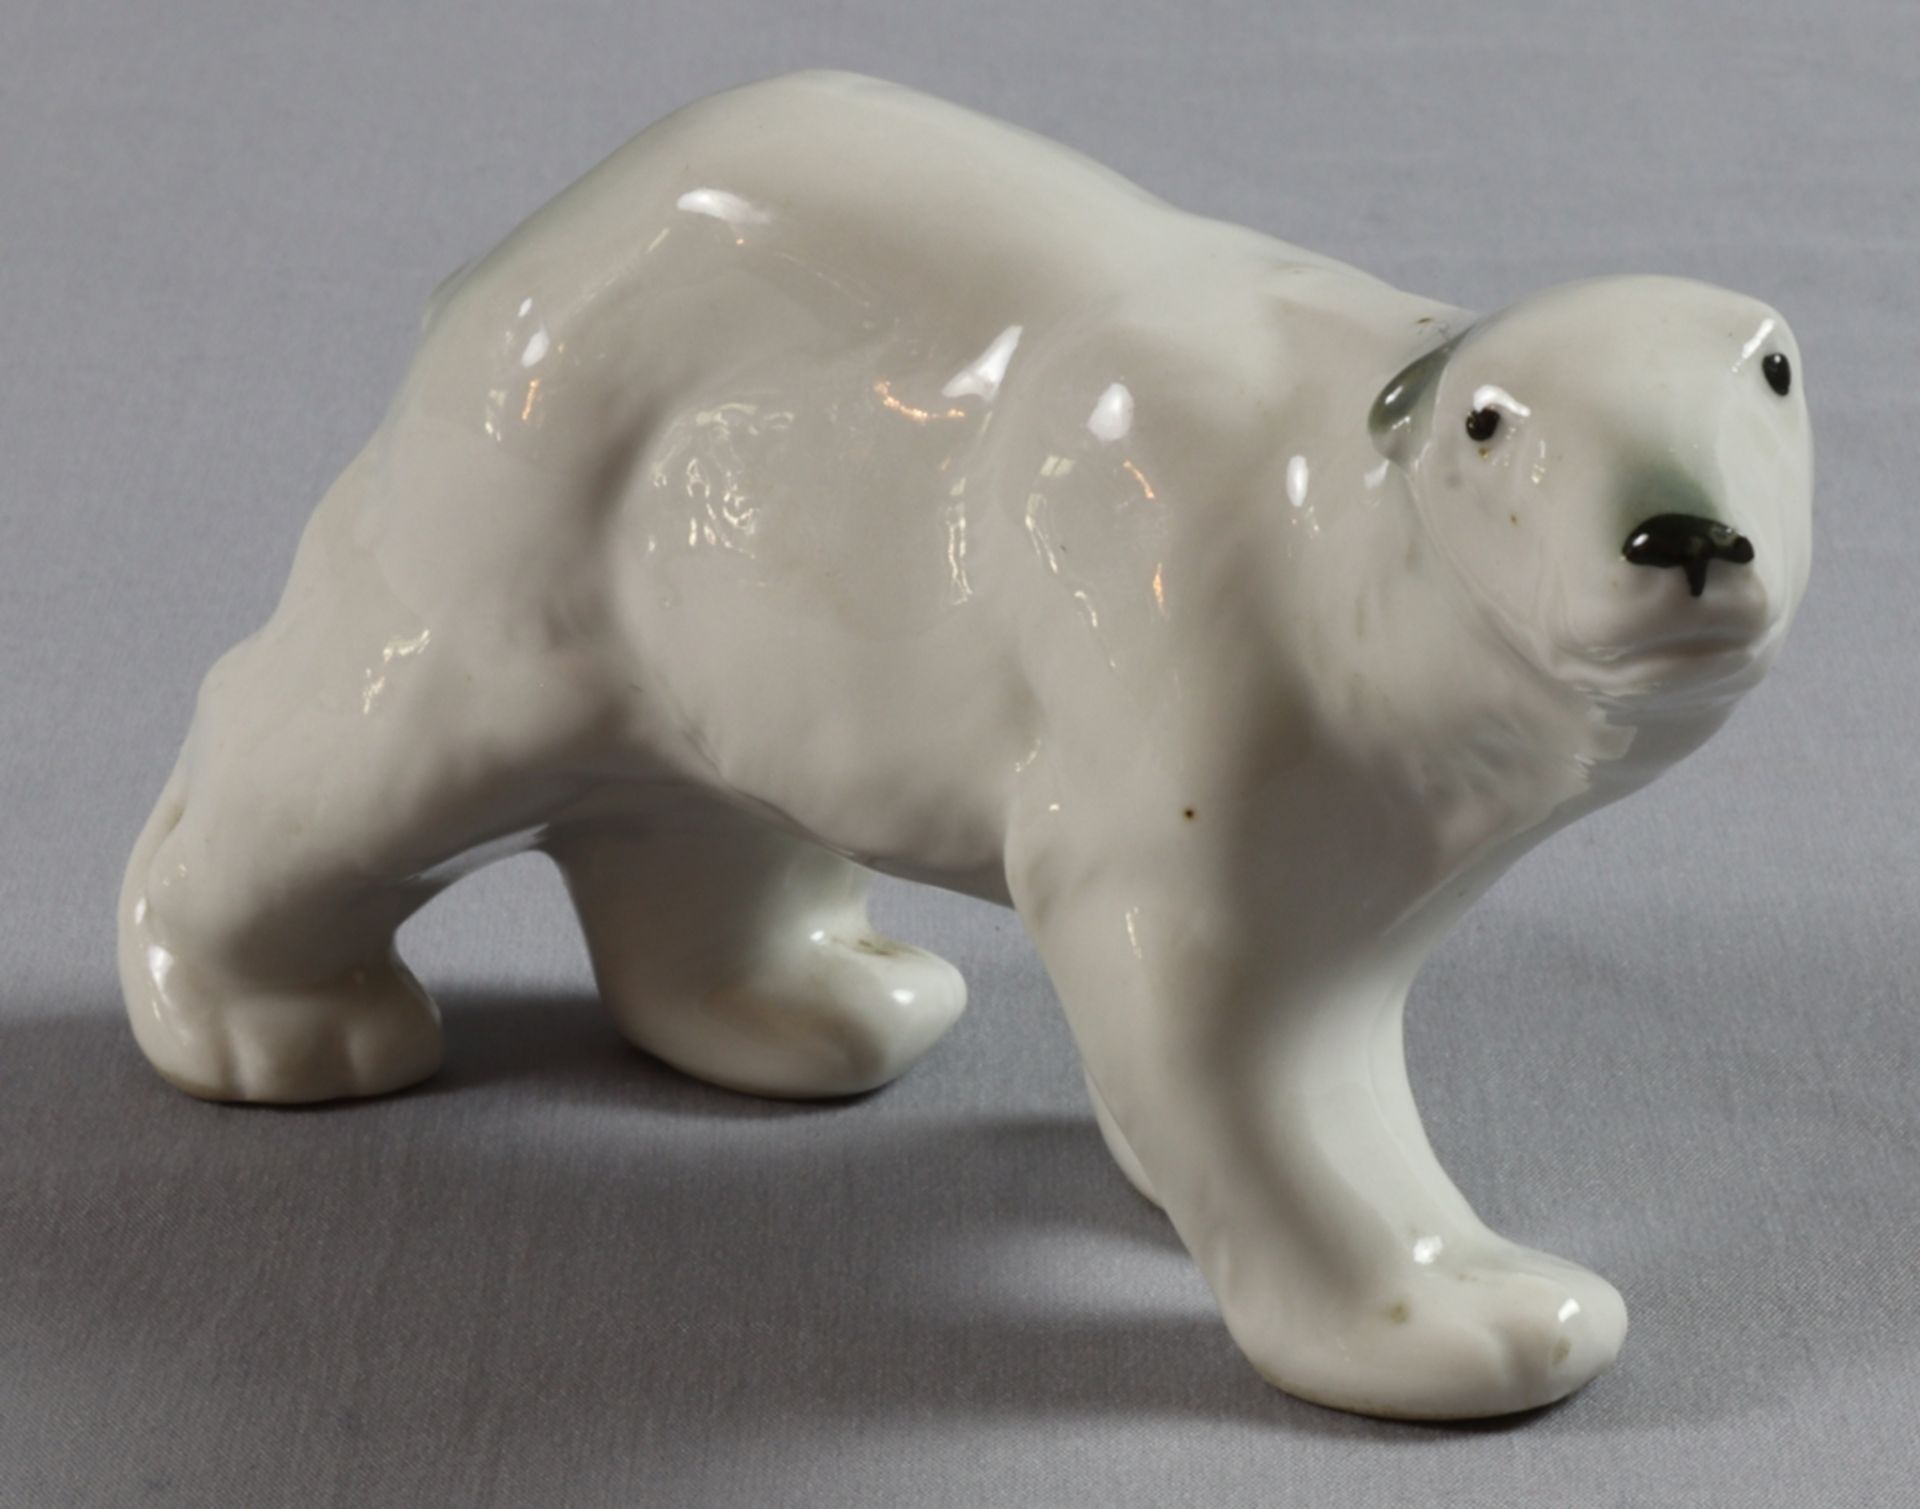 Porcelain figures, two polar bears early 20th century, German - Image 3 of 4